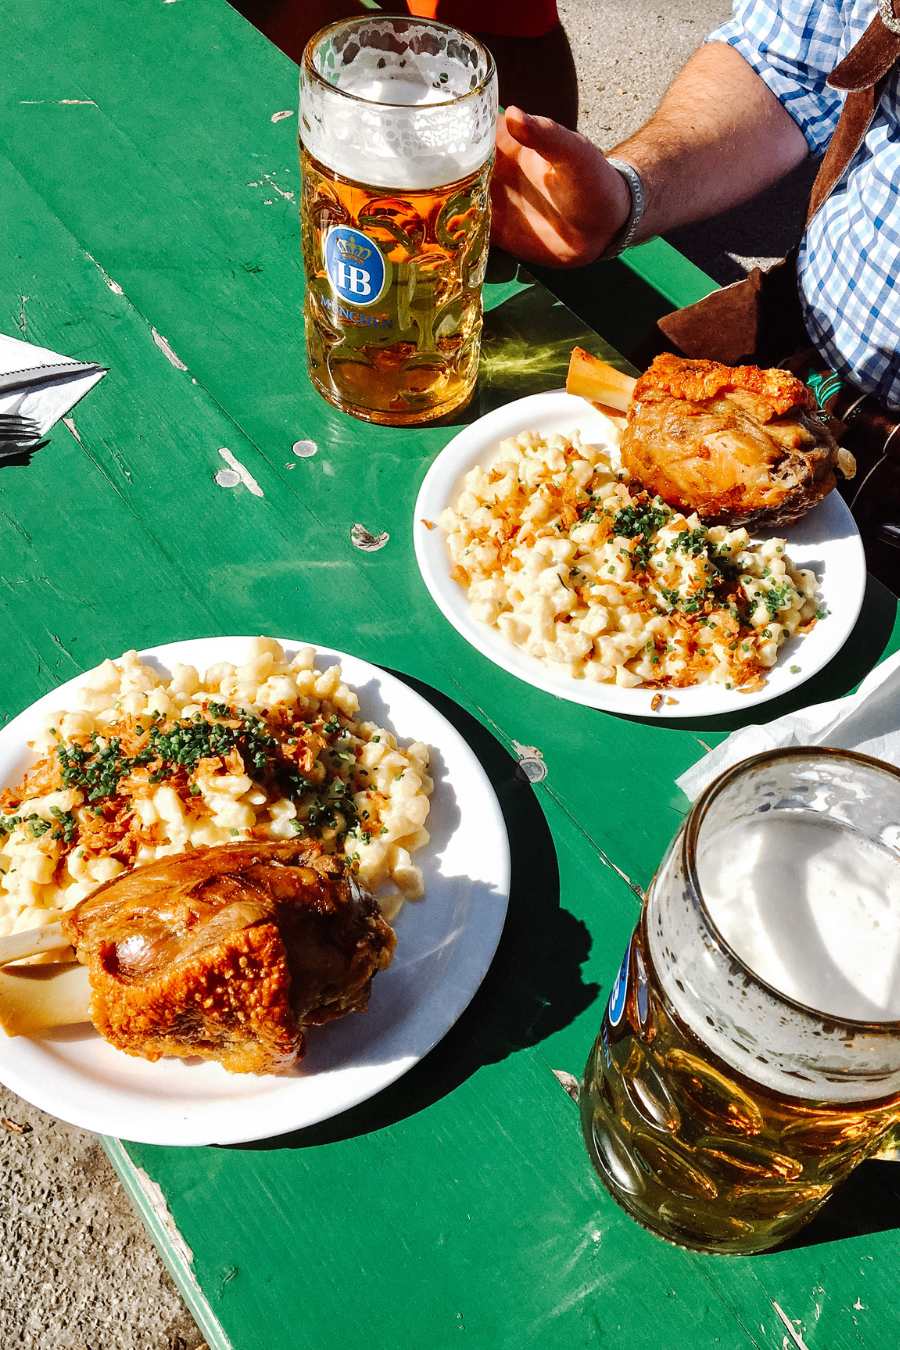 Where to eat in Munich